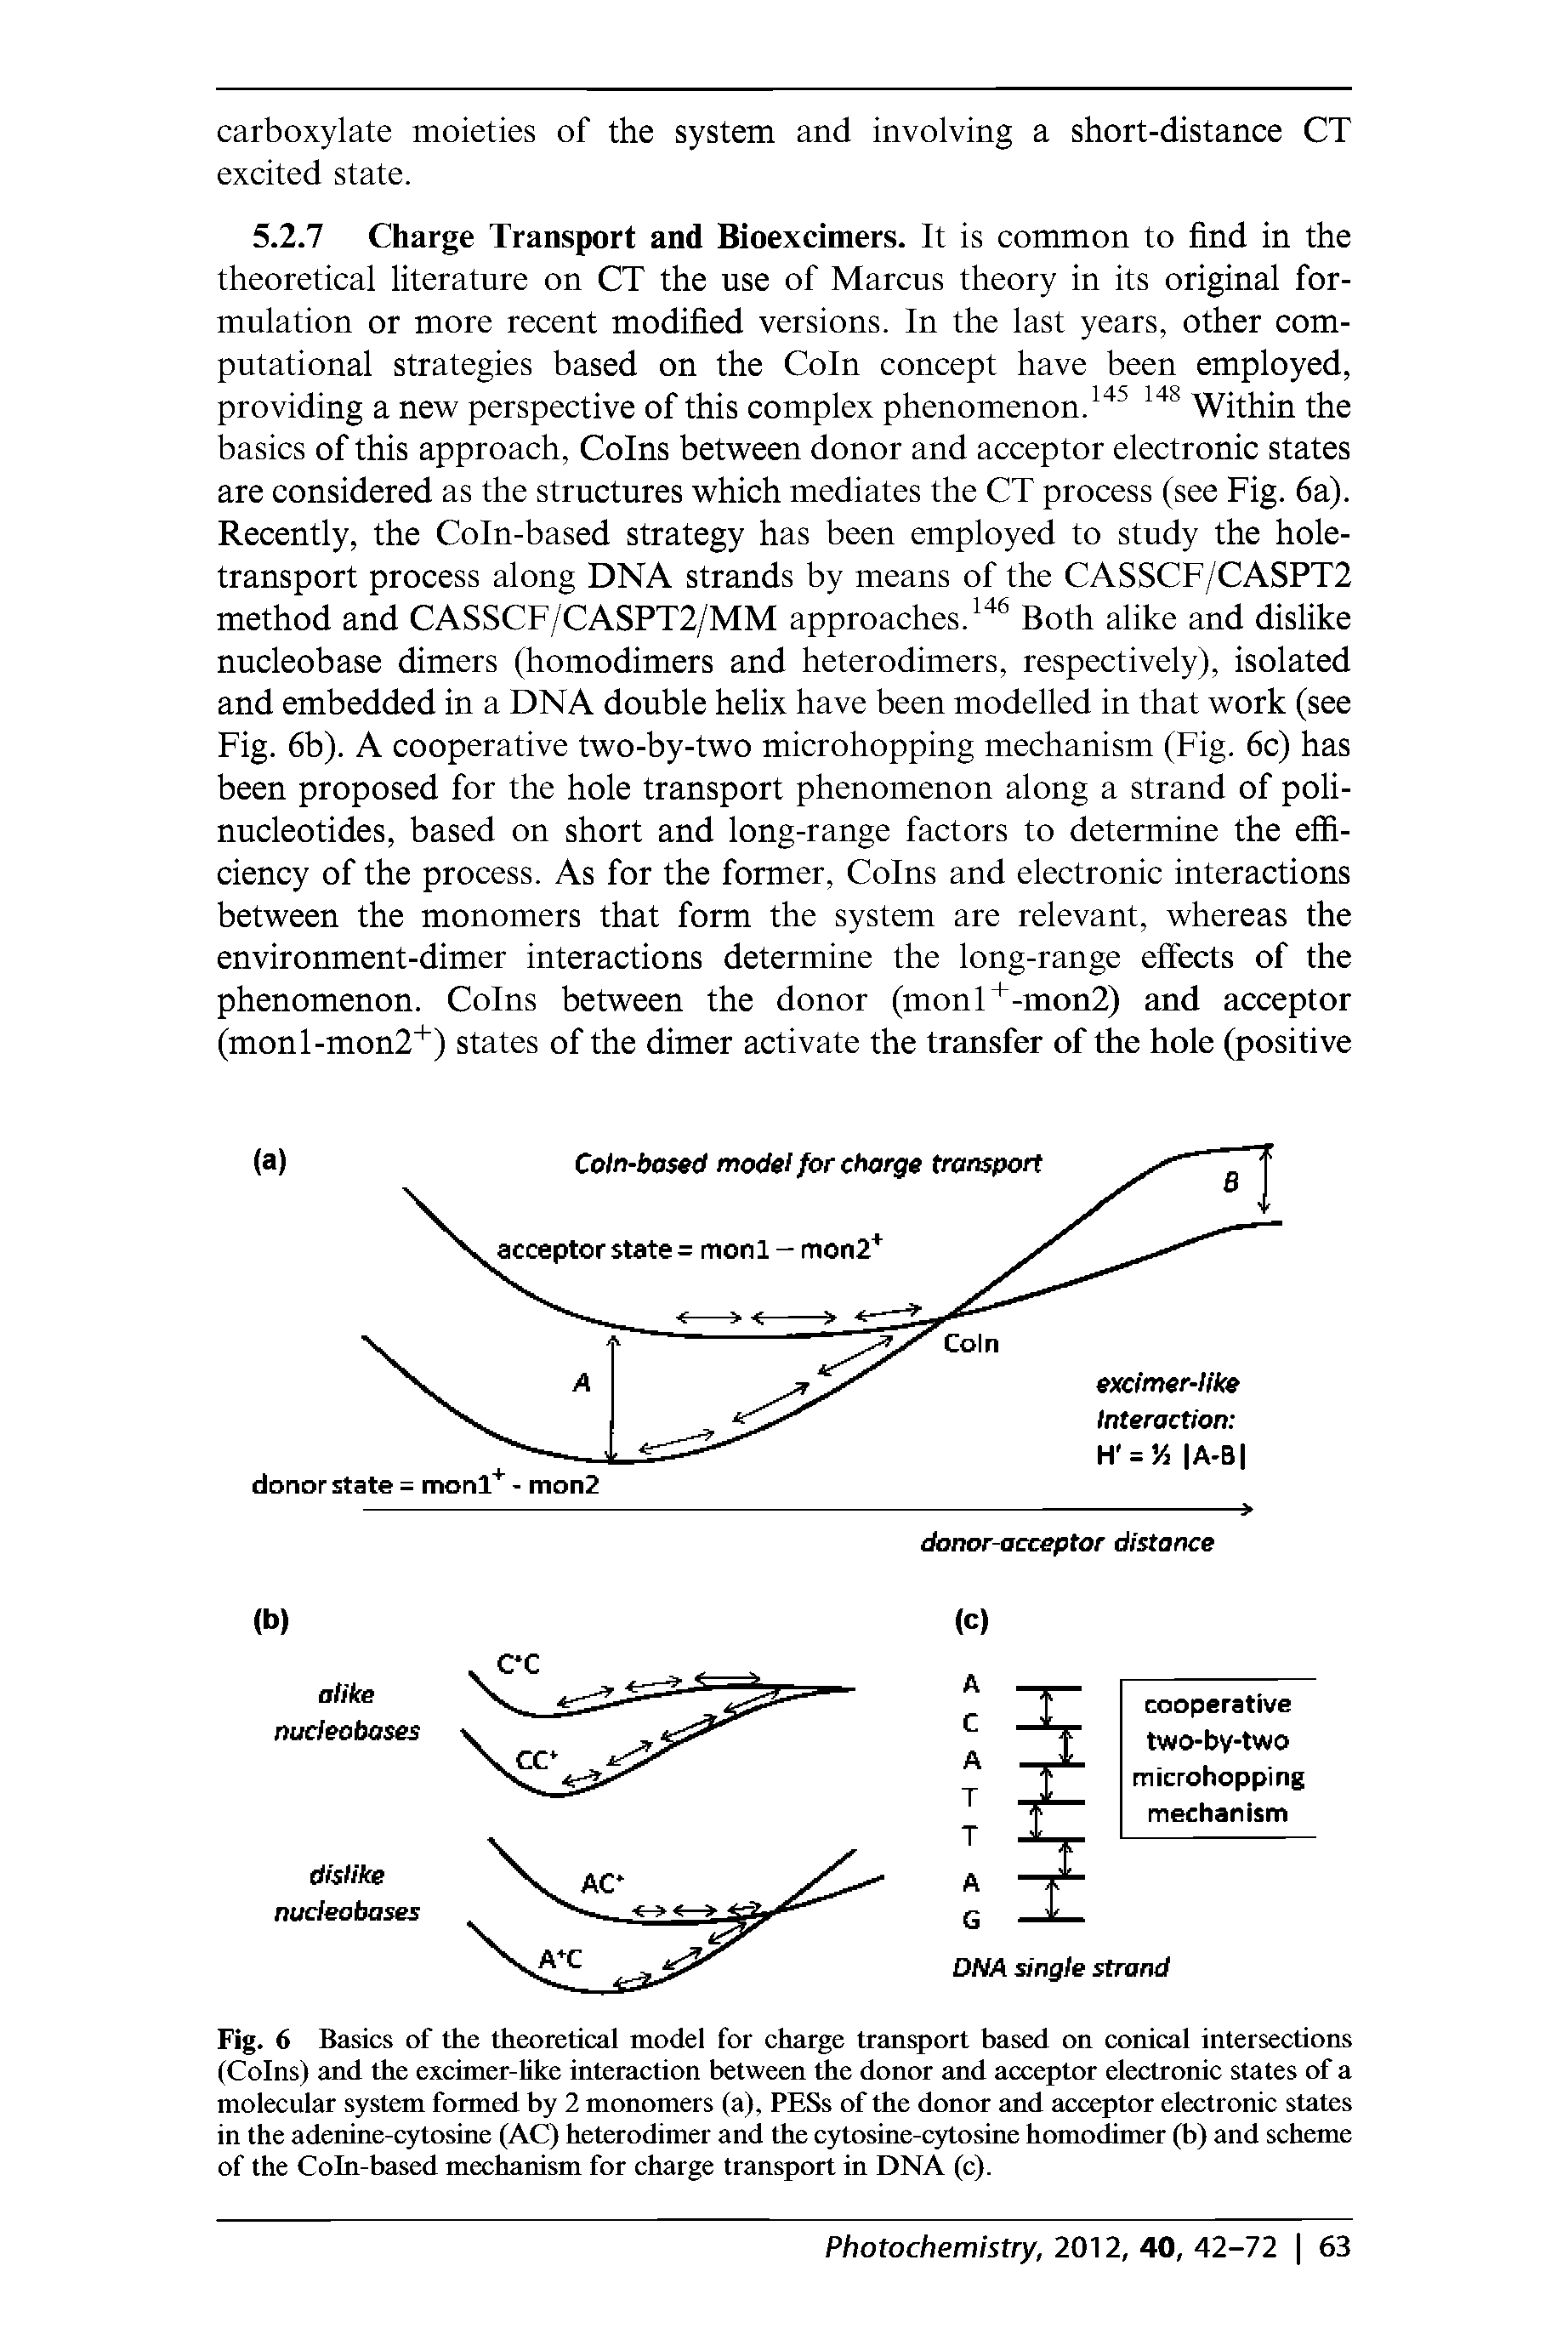 Fig. 6 Basics of the theoretical model for charge transport based on conical intersections (Coins) and the excimer-Hke interaction between the donor and acceptor electronic states of a molecular system formed by 2 monomers (a), PESs of the donor and acceptor electronic states in the adenine-cytosine (AC) heterodimer and the cytosine-cytosine homodimer (b) and scheme of the Coin-based mechanism for charge transport in DNA (c).